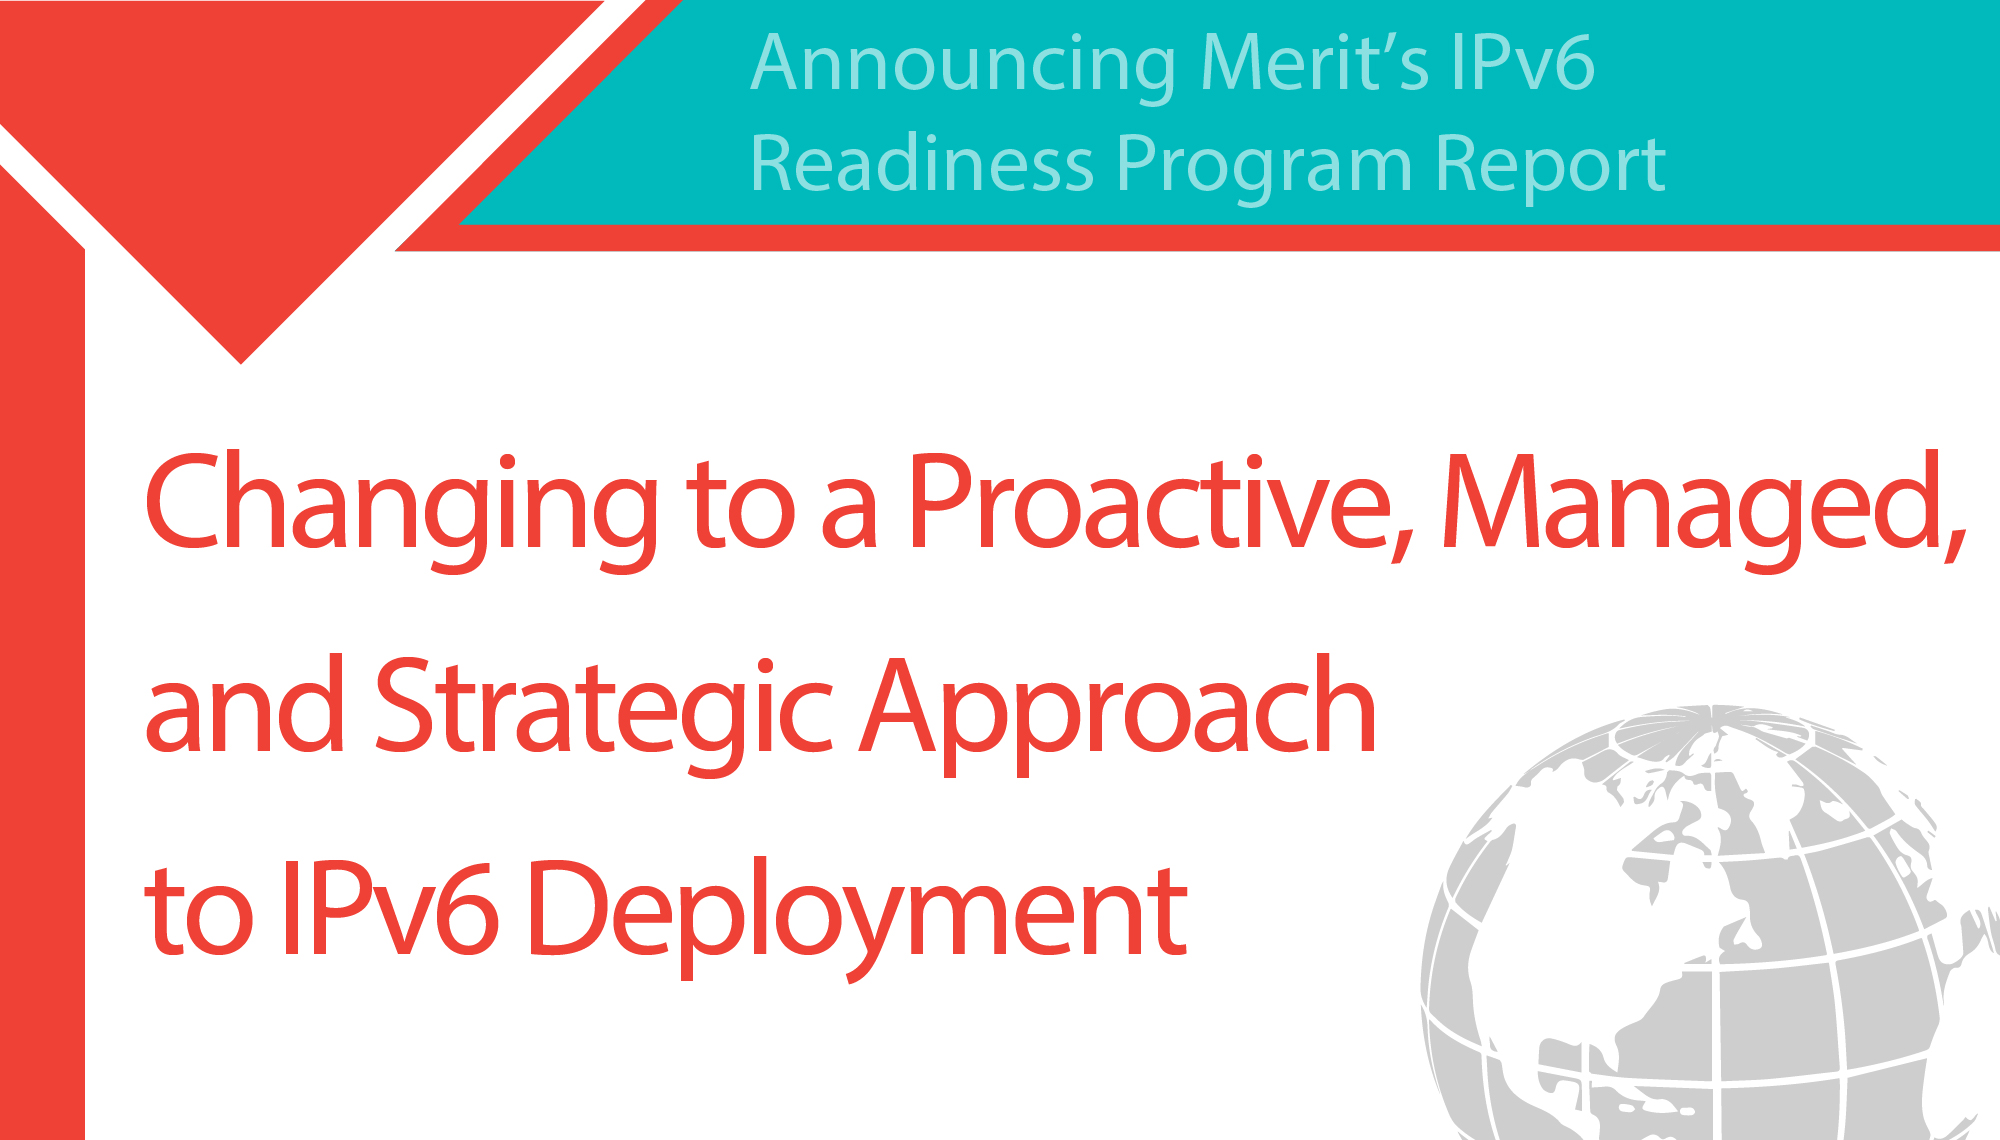 Changing to a Proactive, Managed, and Strategic Approach to IPv6 Deployment